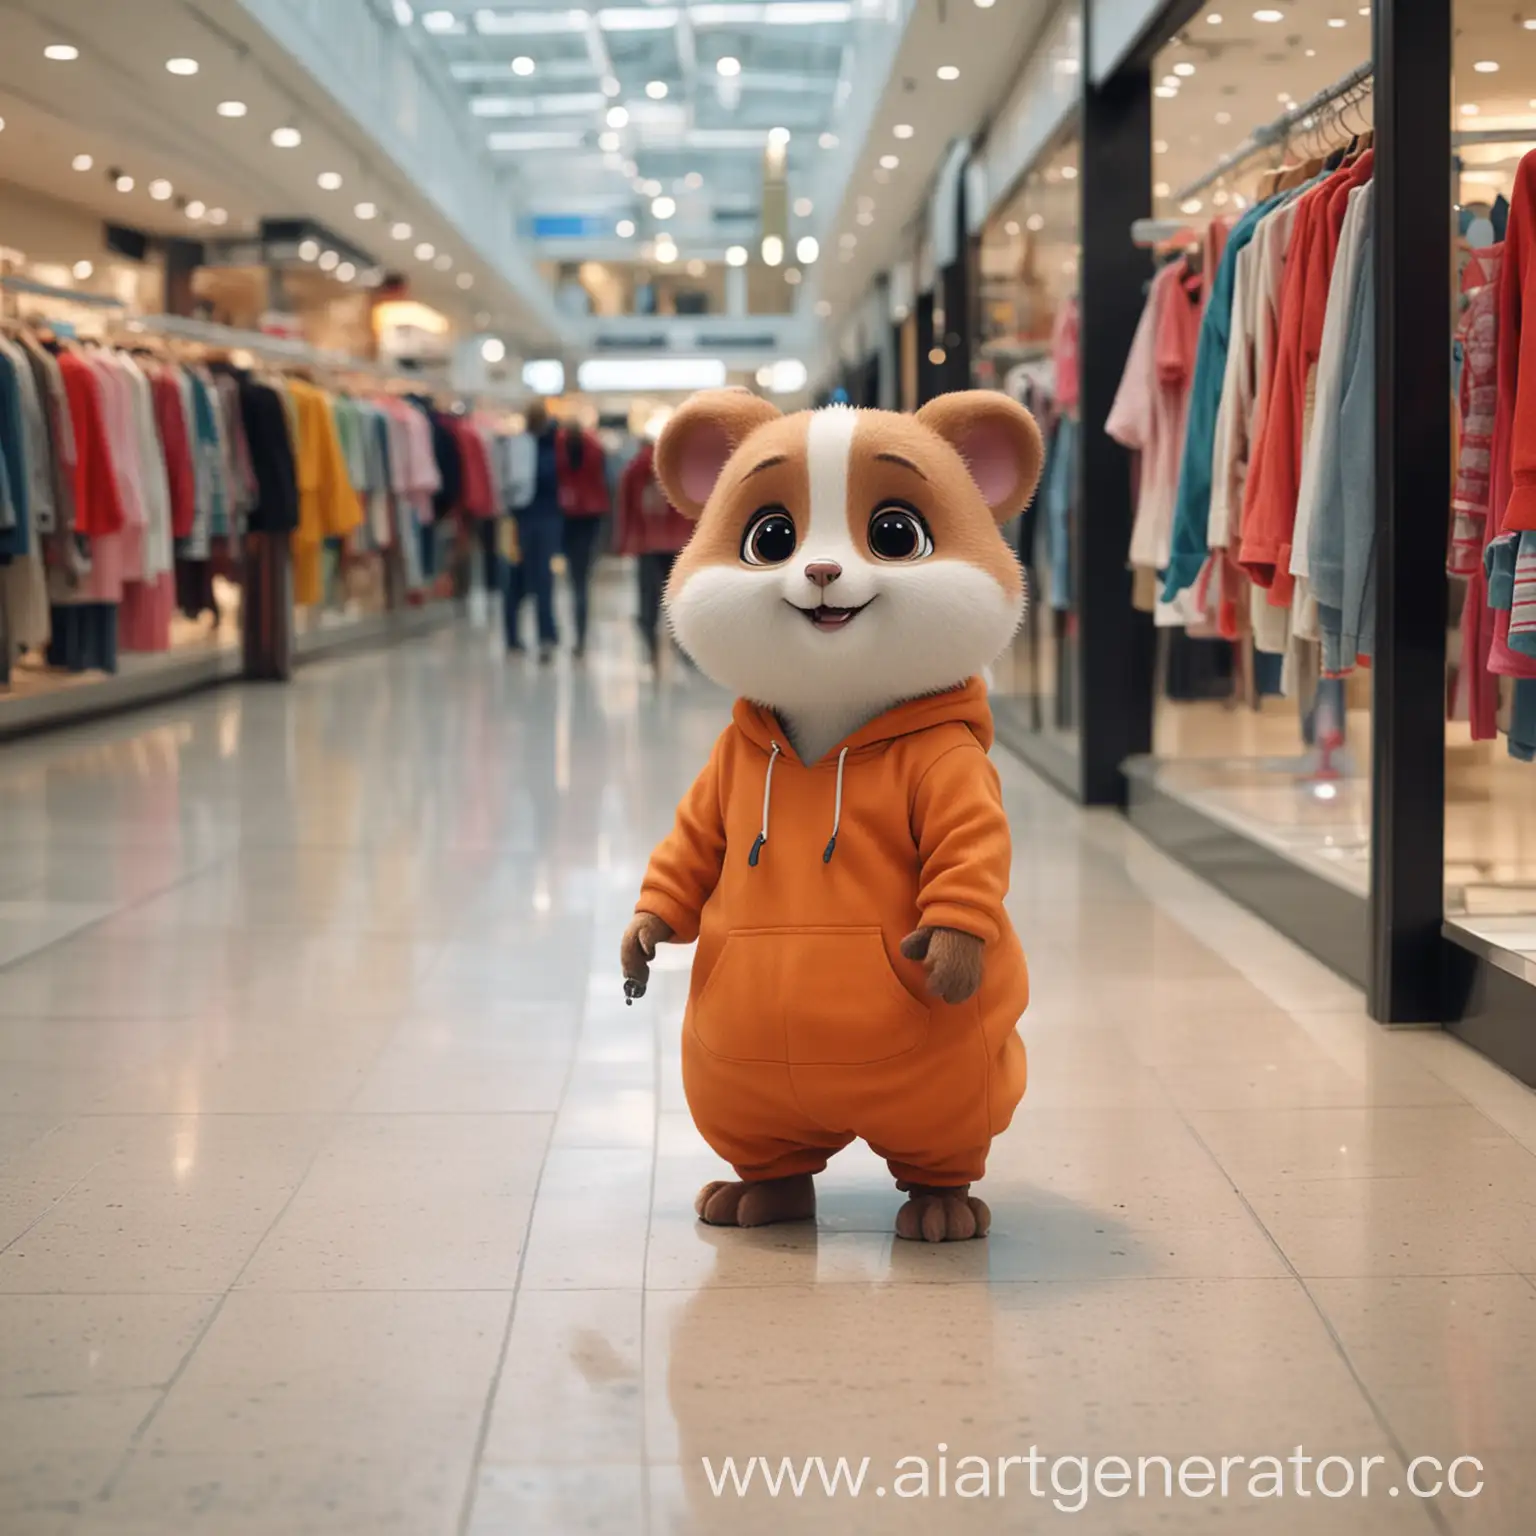 Draw a funny, cute picture for an advertisement, which should depict: a cute animal looking for, buying, clothes for itself in a shopping mall, 4k, full hd